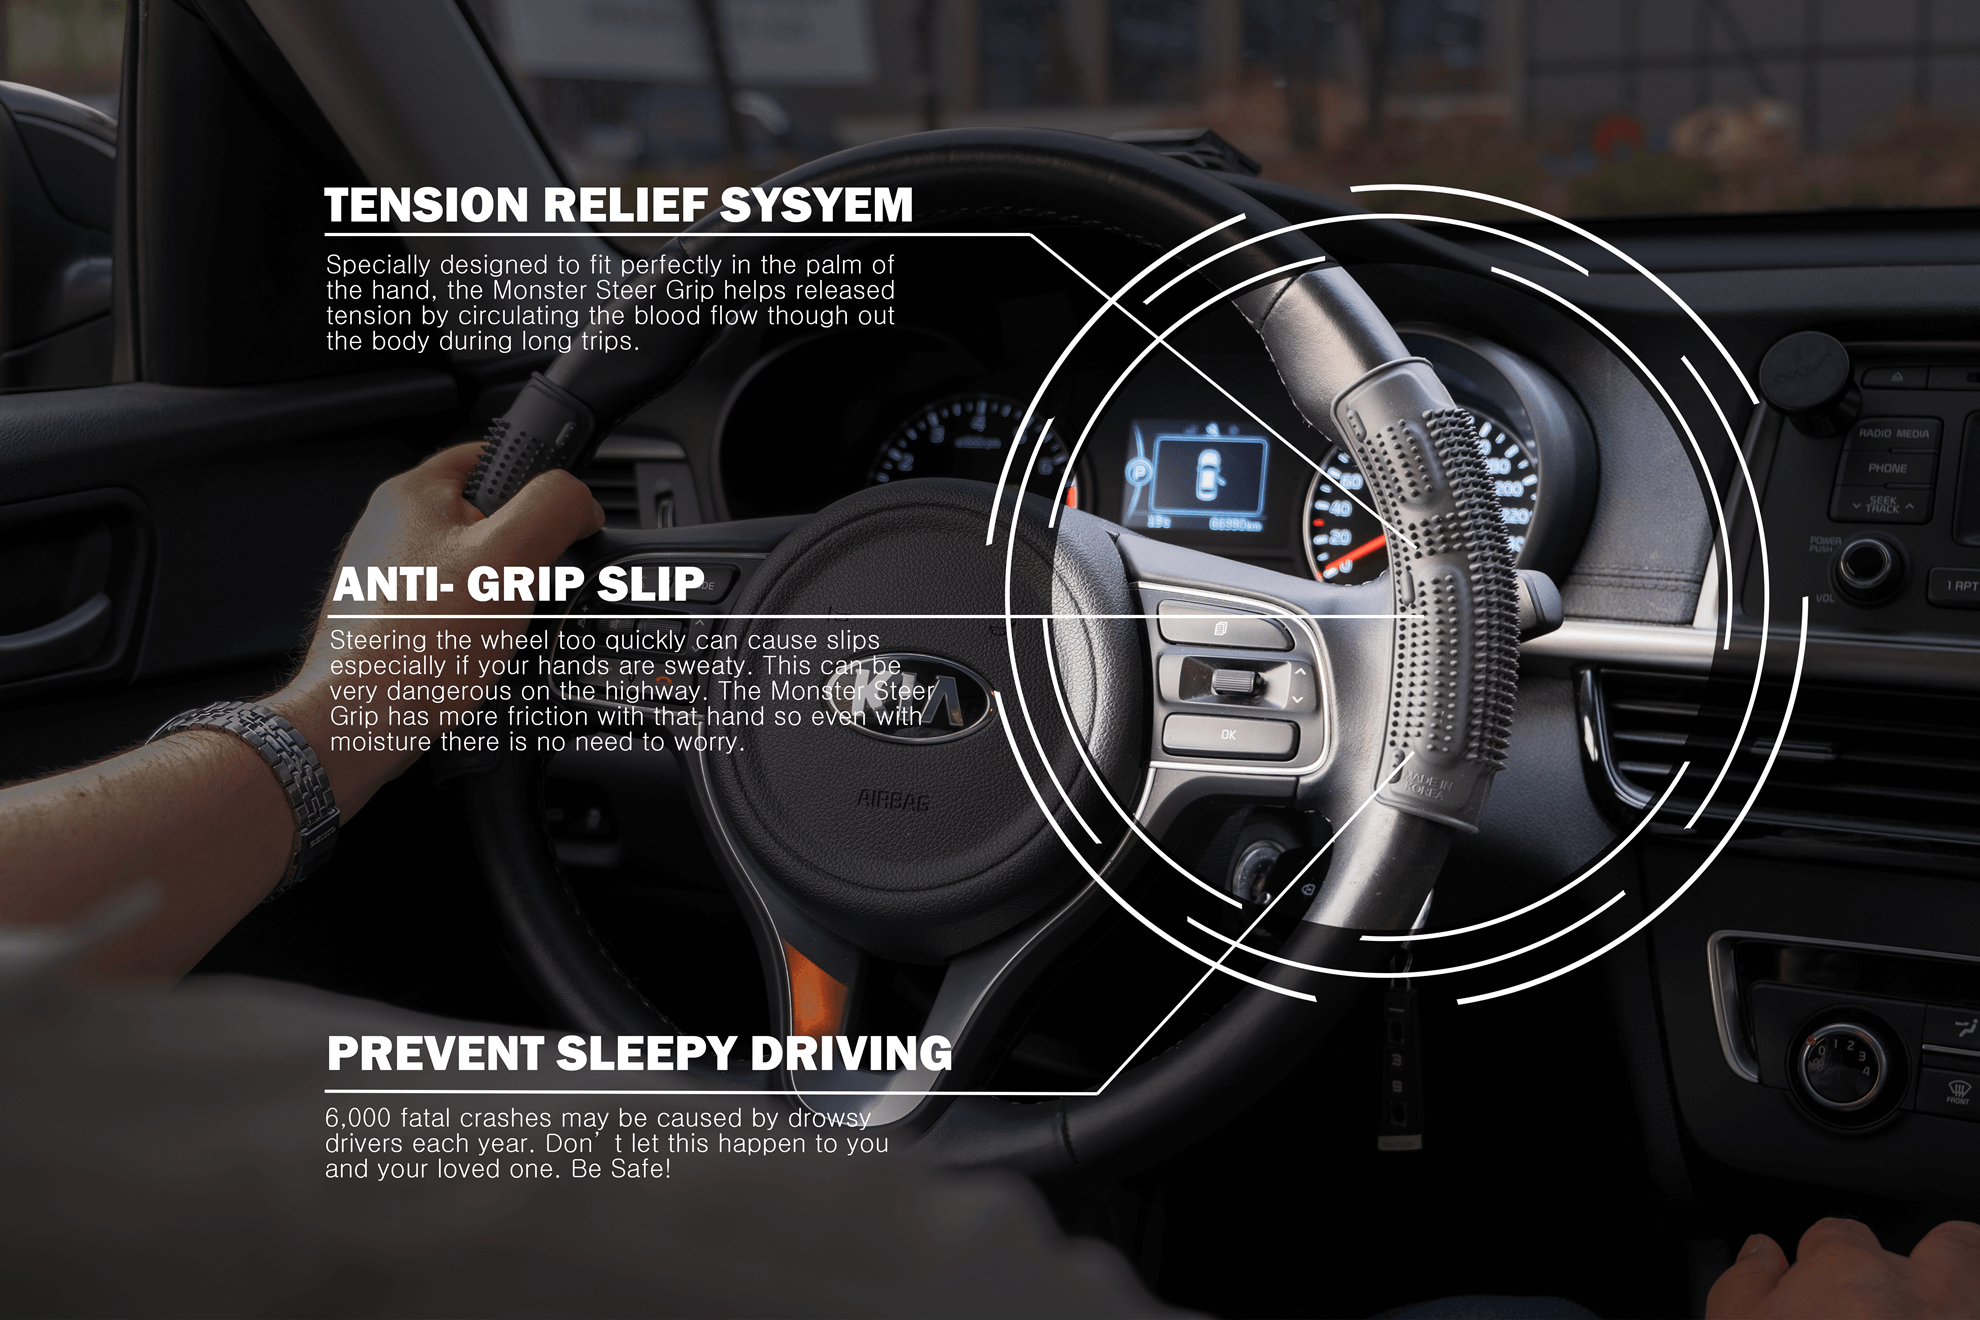 Introducing The Monster Grip, an Anti-slip Sleep Prevention Grip for Long-term drivers